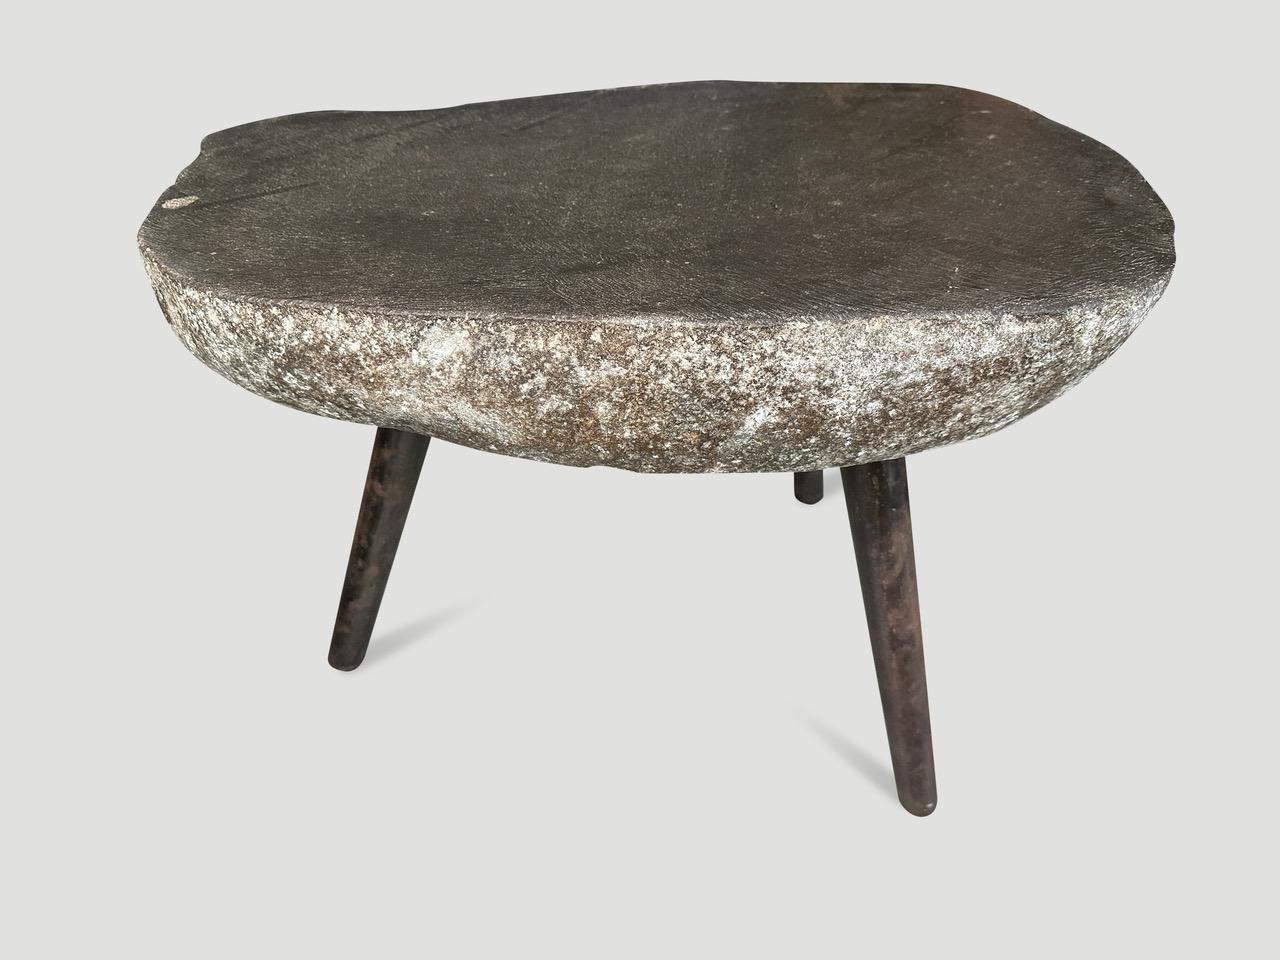 River stone side table from the Ayung River on the island of Bali. We added charred metal legs and polished the top. The sides are left unpolished in contrast. Perfect for poolside. Collection available. All one of a kind. Please inquire. The images